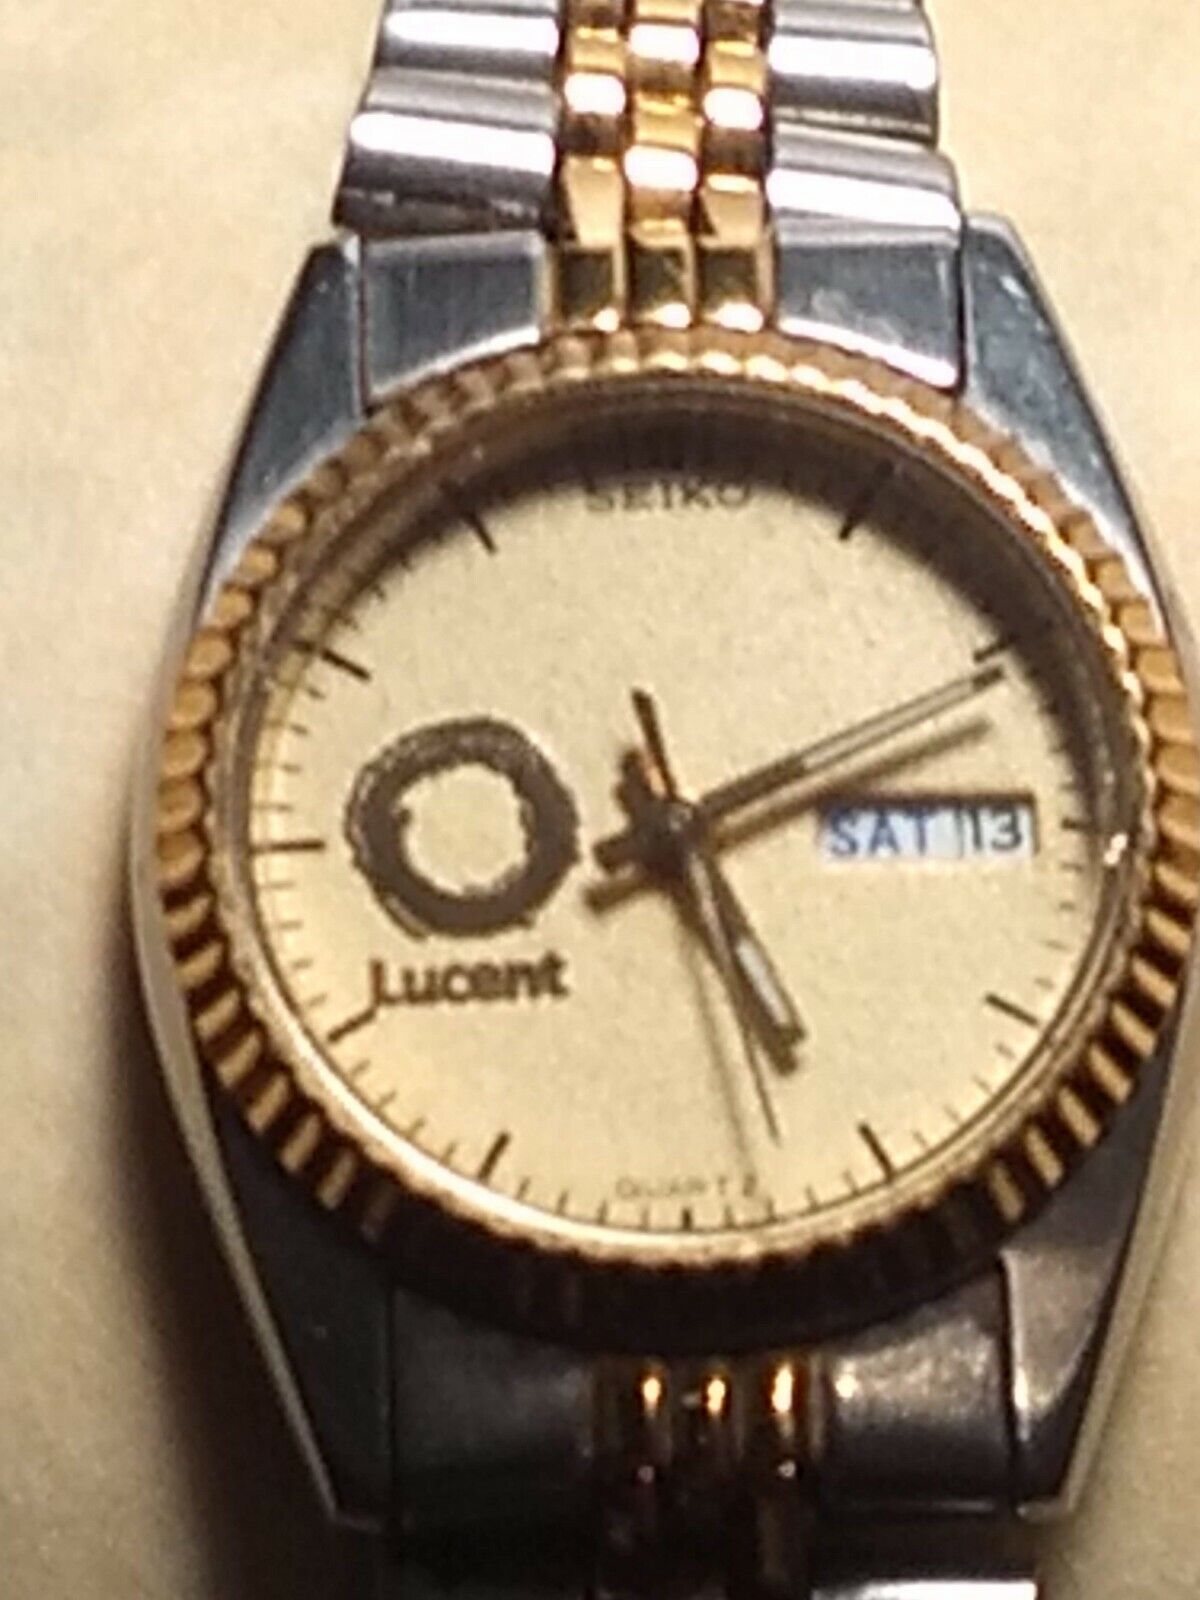 SEKIO woman's "lucent" commemorative watch, day and time, two tone band